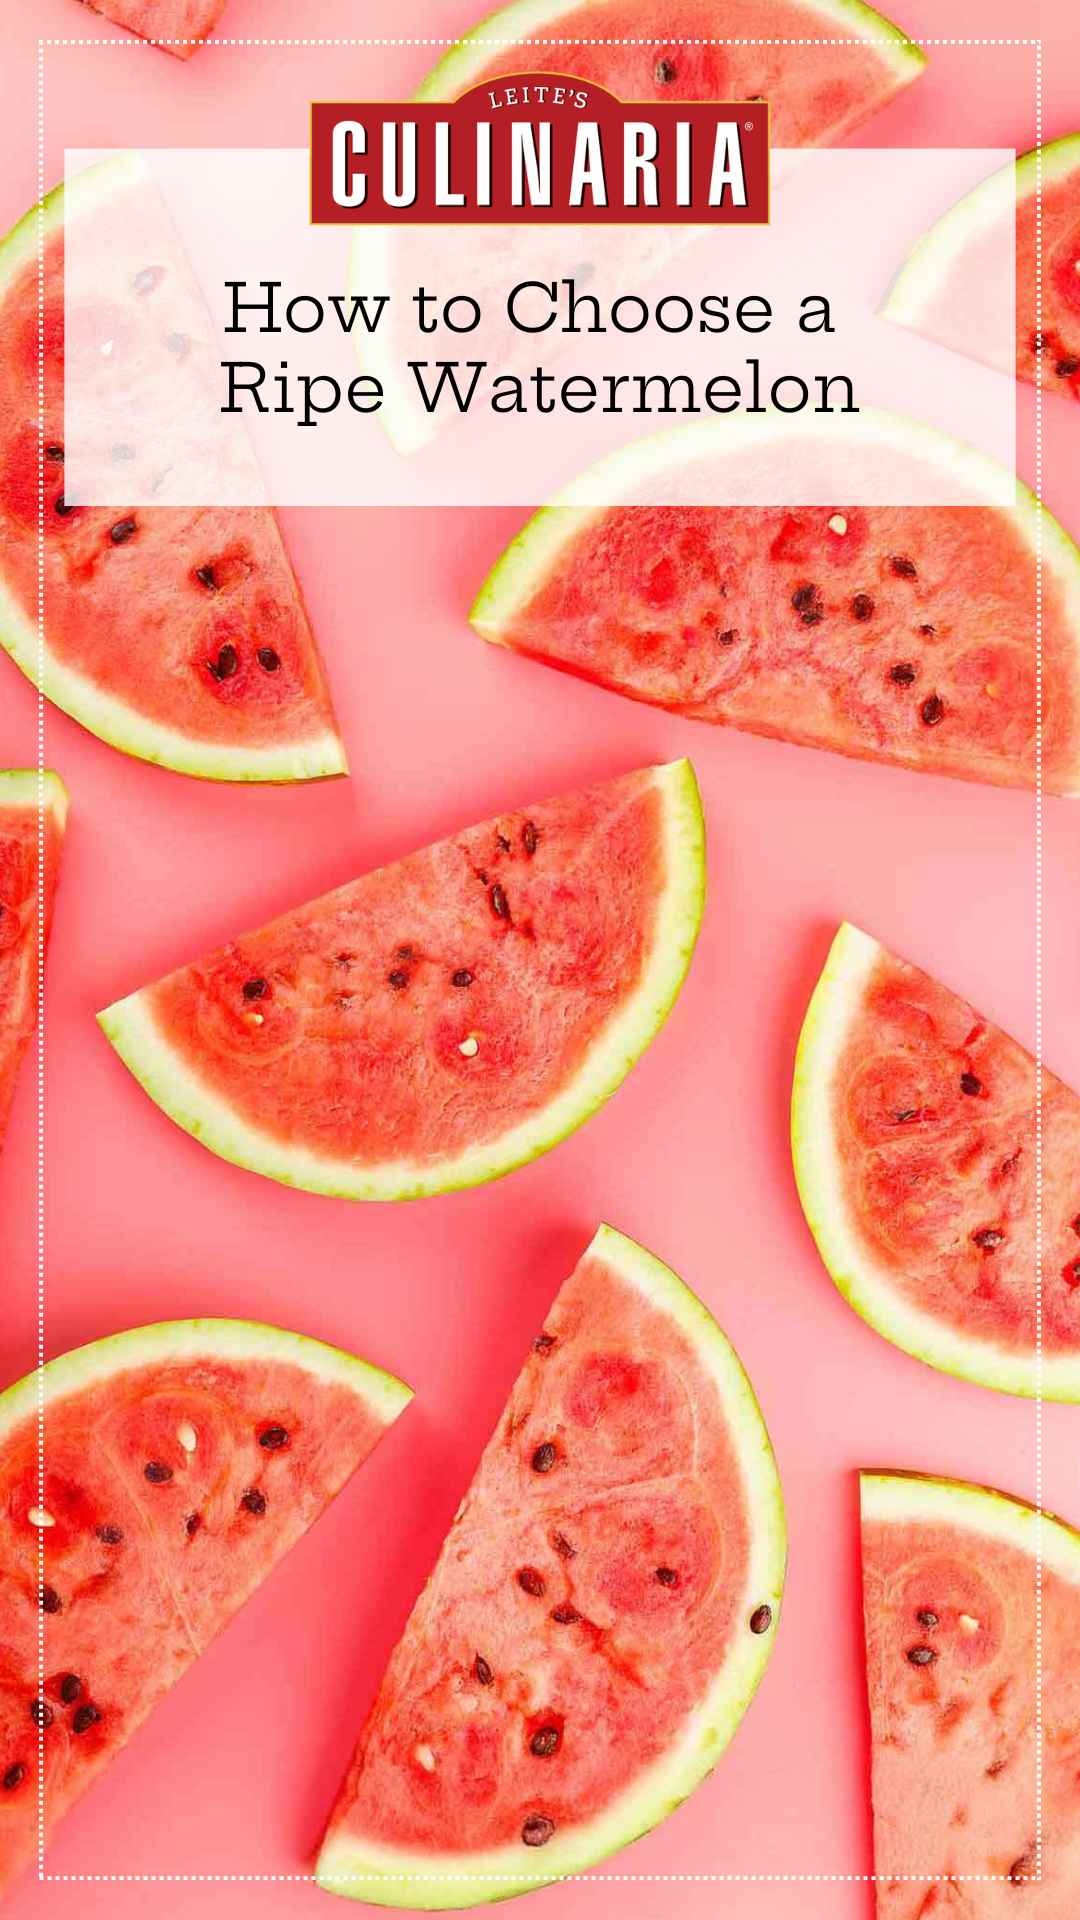 Slices of watermelon on a pink background.